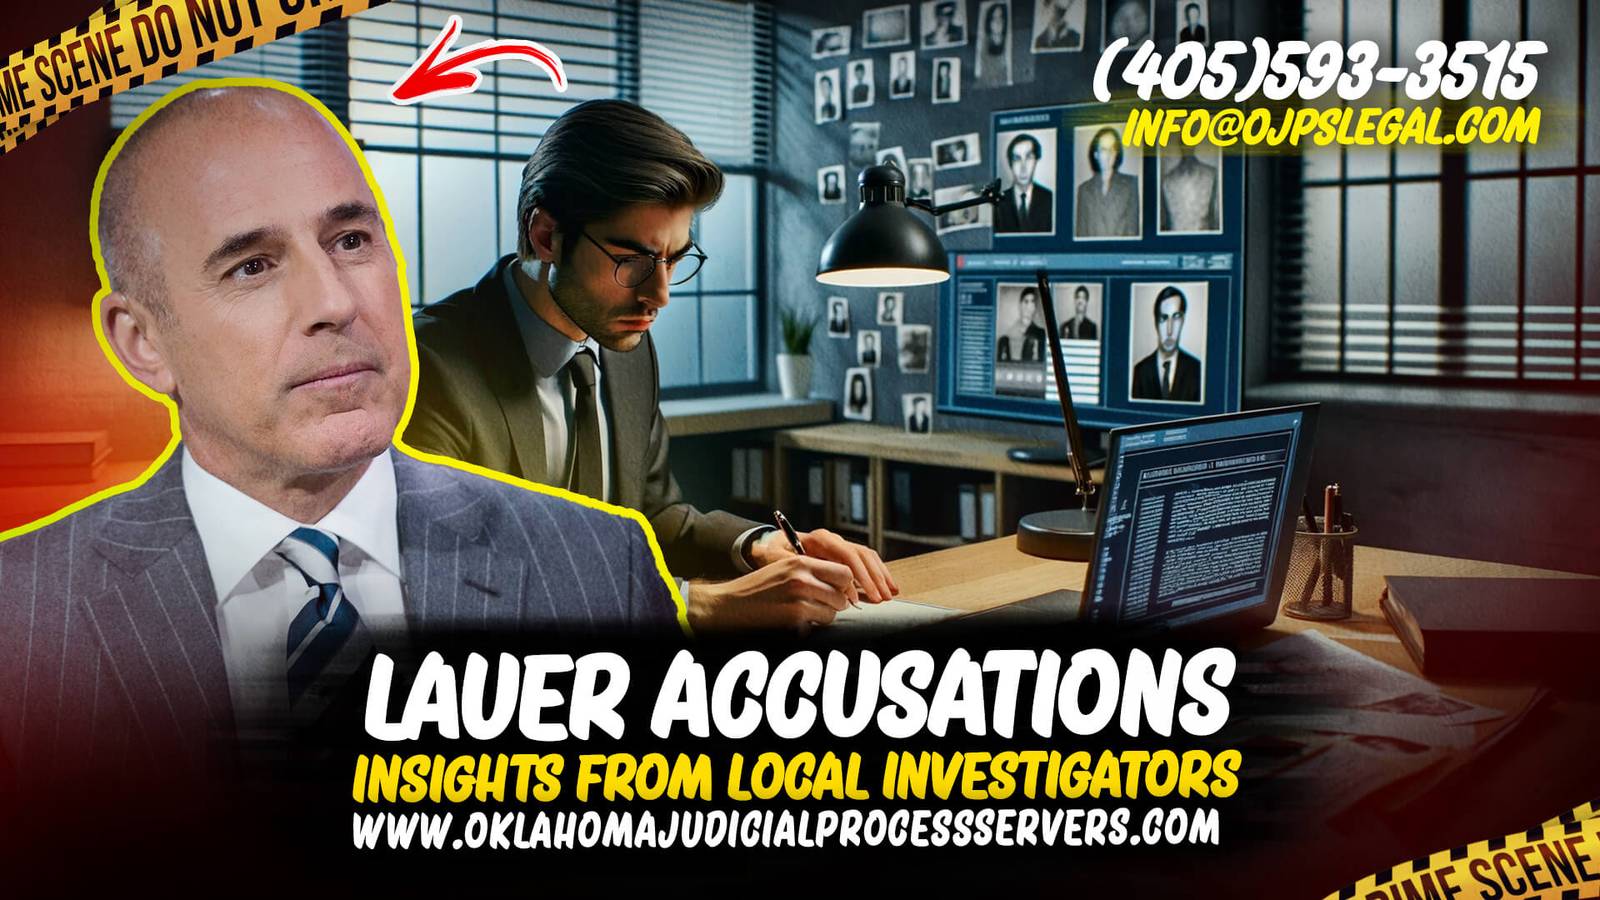 Lauer Accusations Insights from Local Investigators